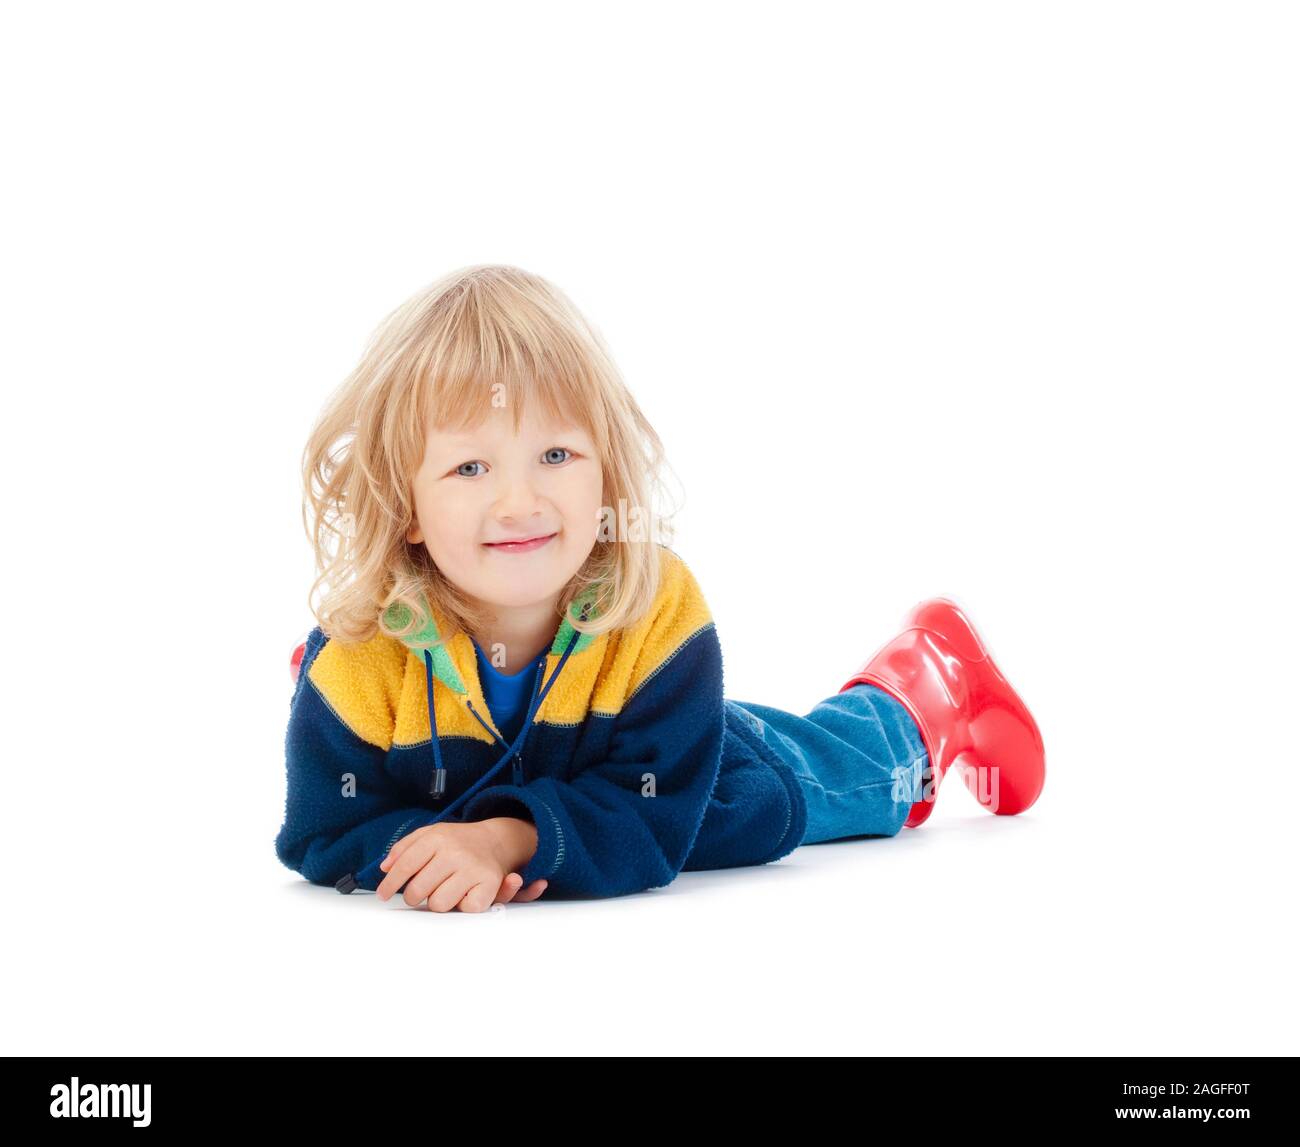 boy with long blond hair lying on the floor - isolated on white Stock Photo